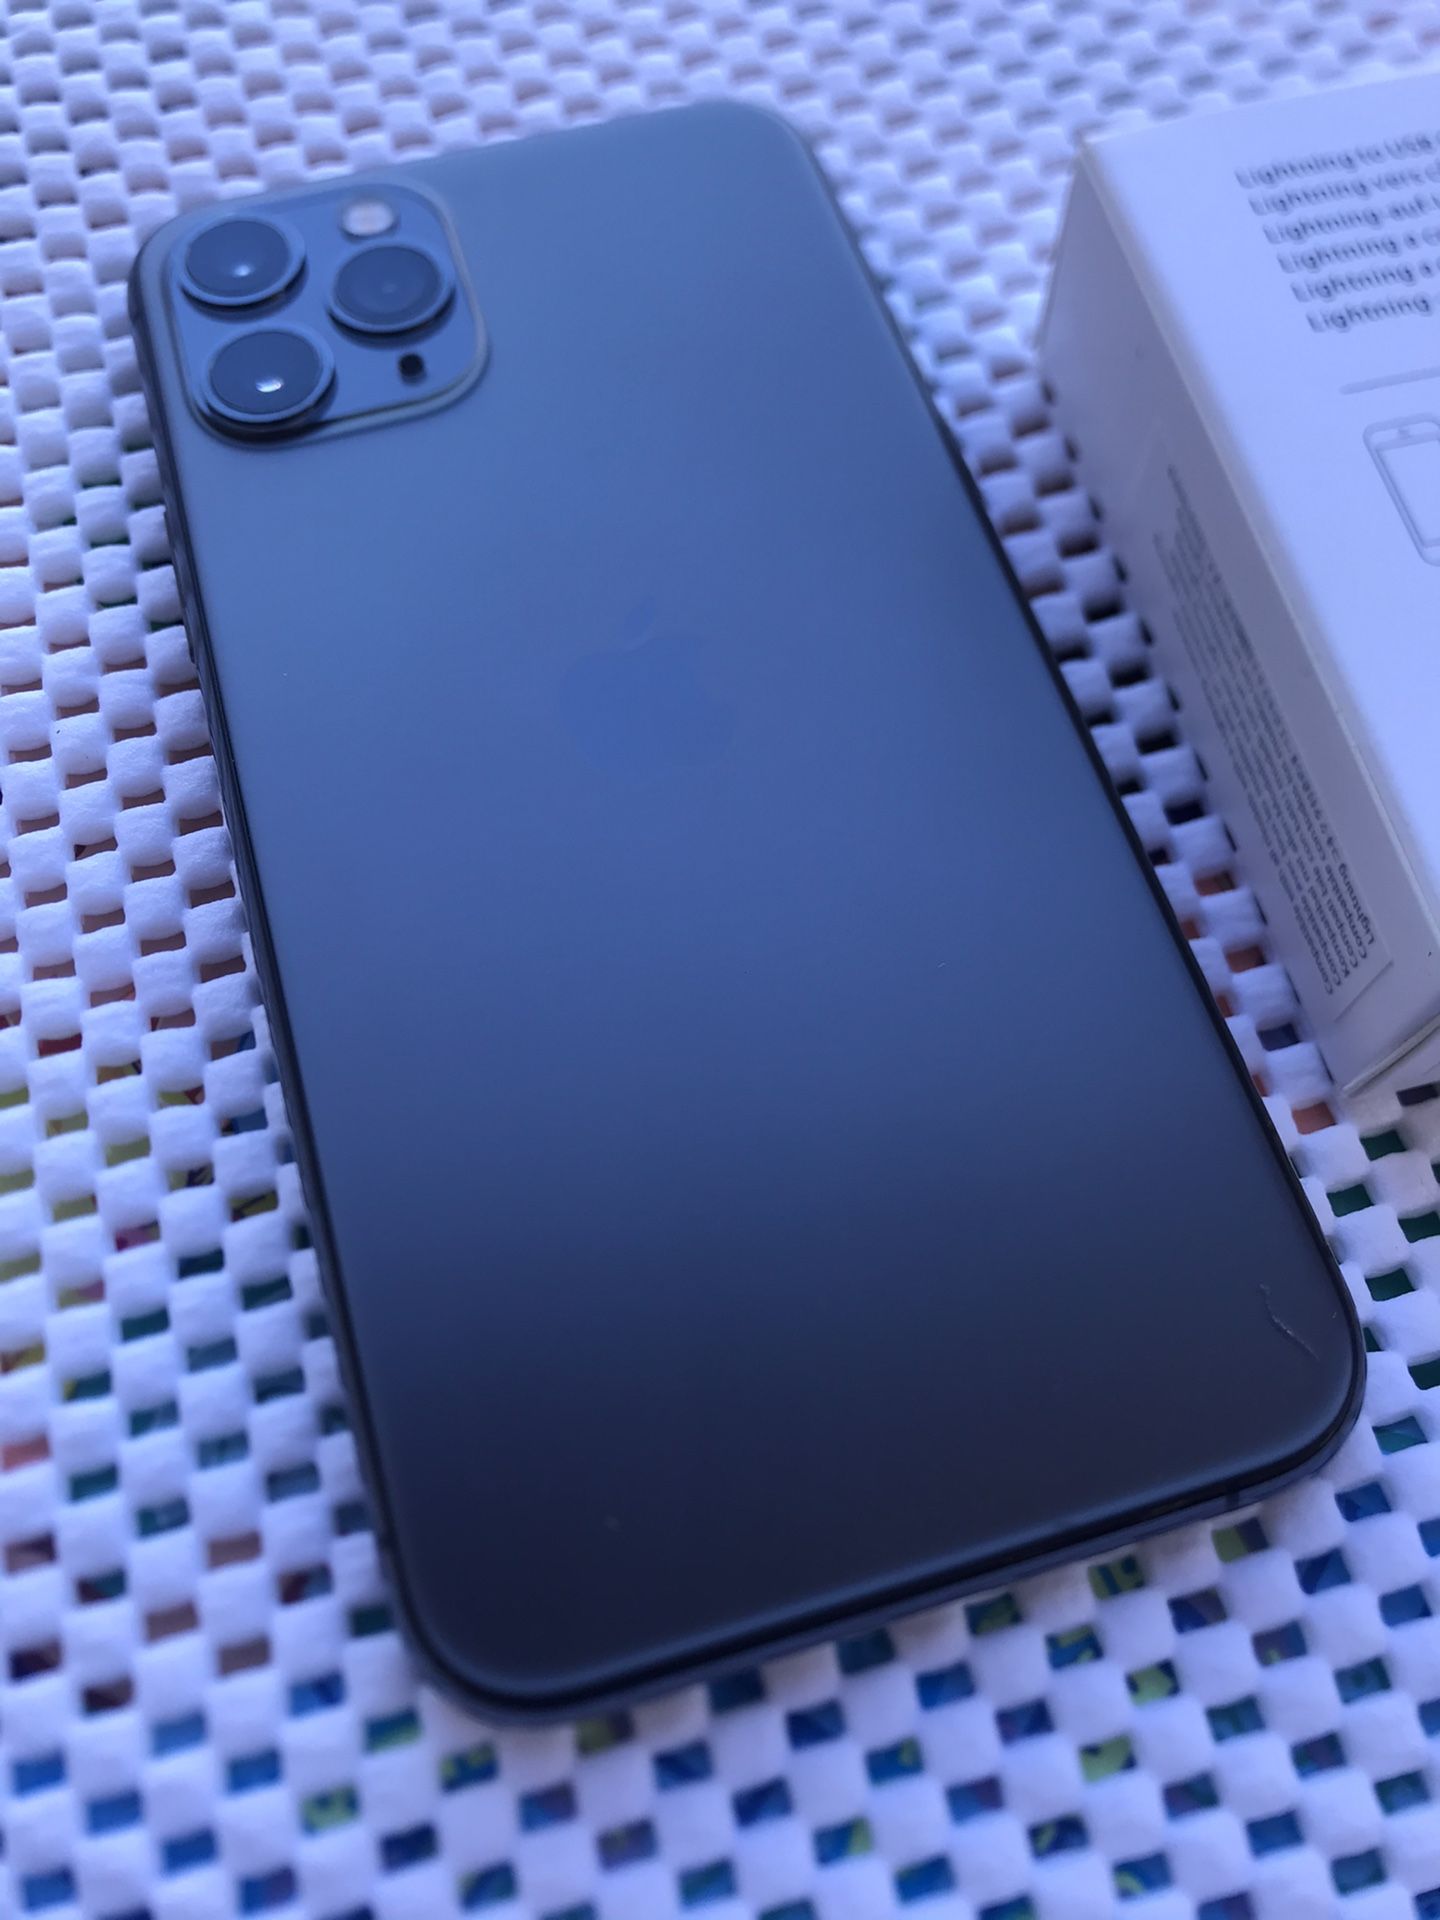 iPhone 11 Pro 64GB Space Gray Ready for T-Mobile MetroPCS Plus Apple Warranty